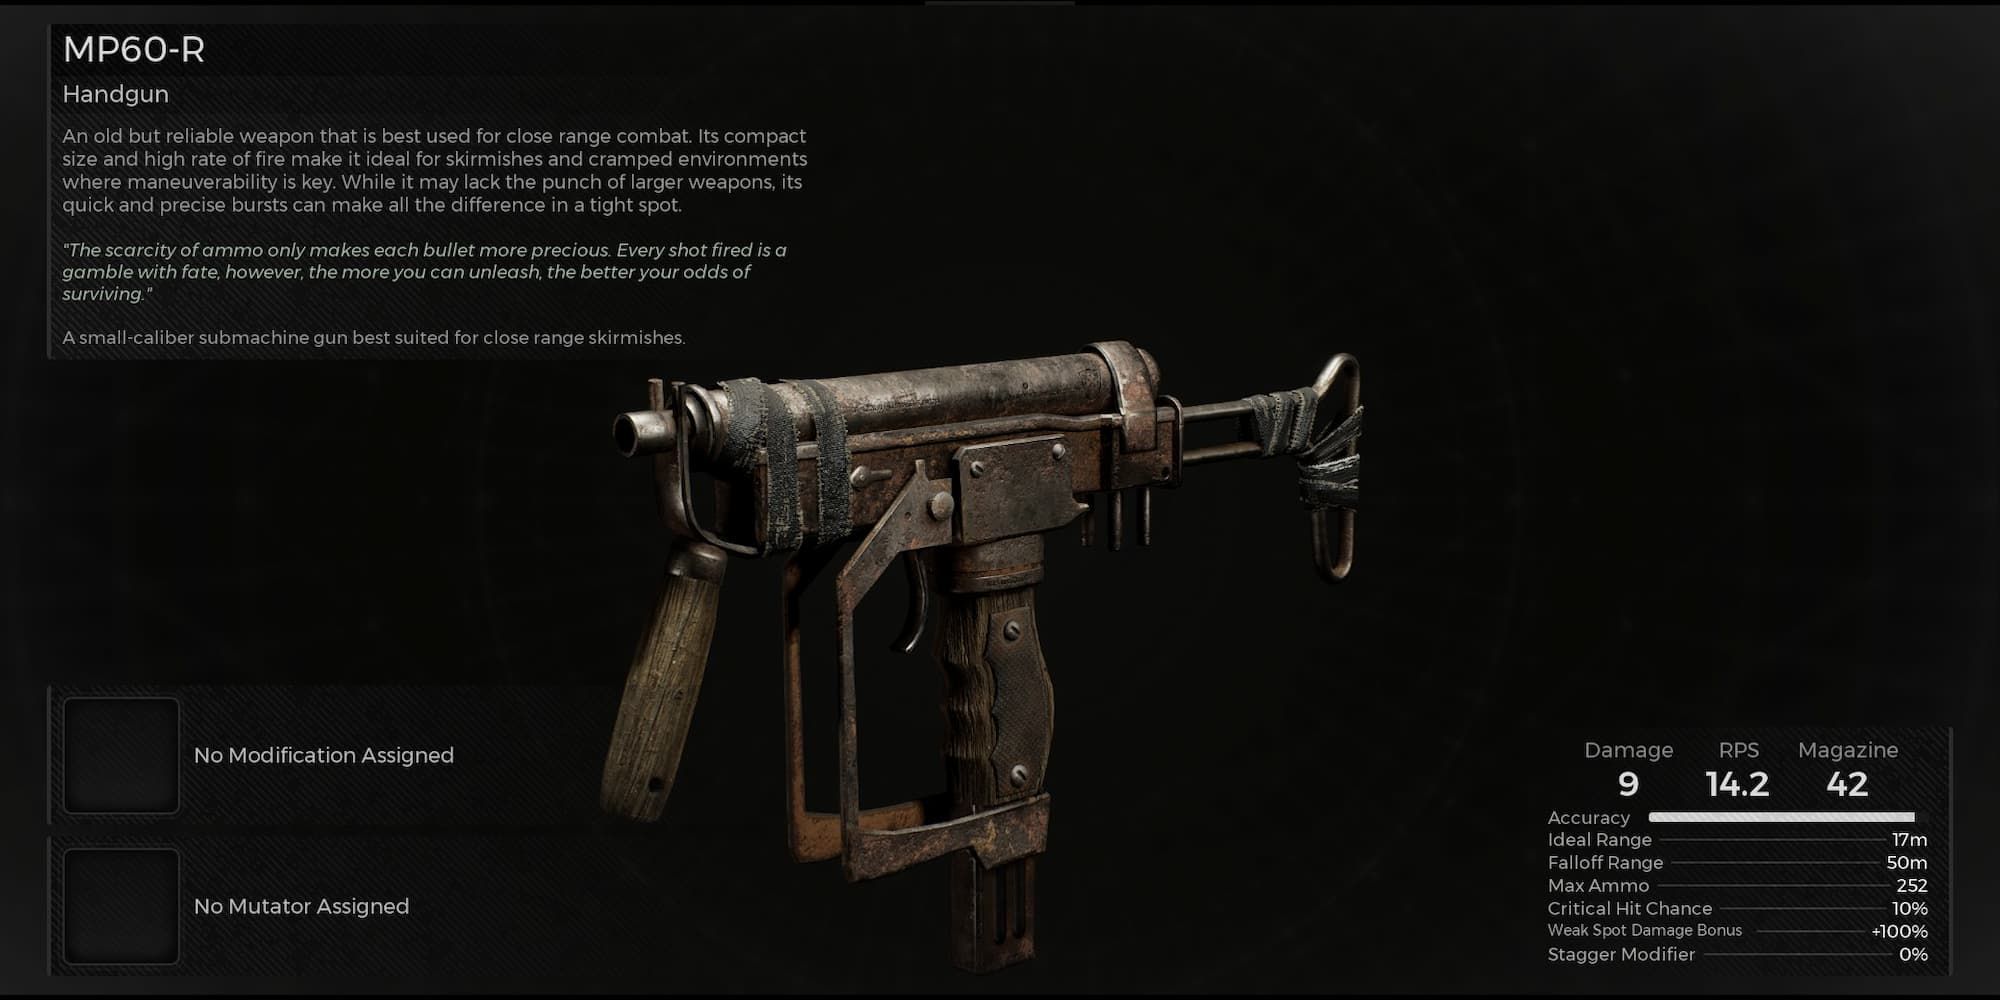 The MP60-R SMG in Remnant 2